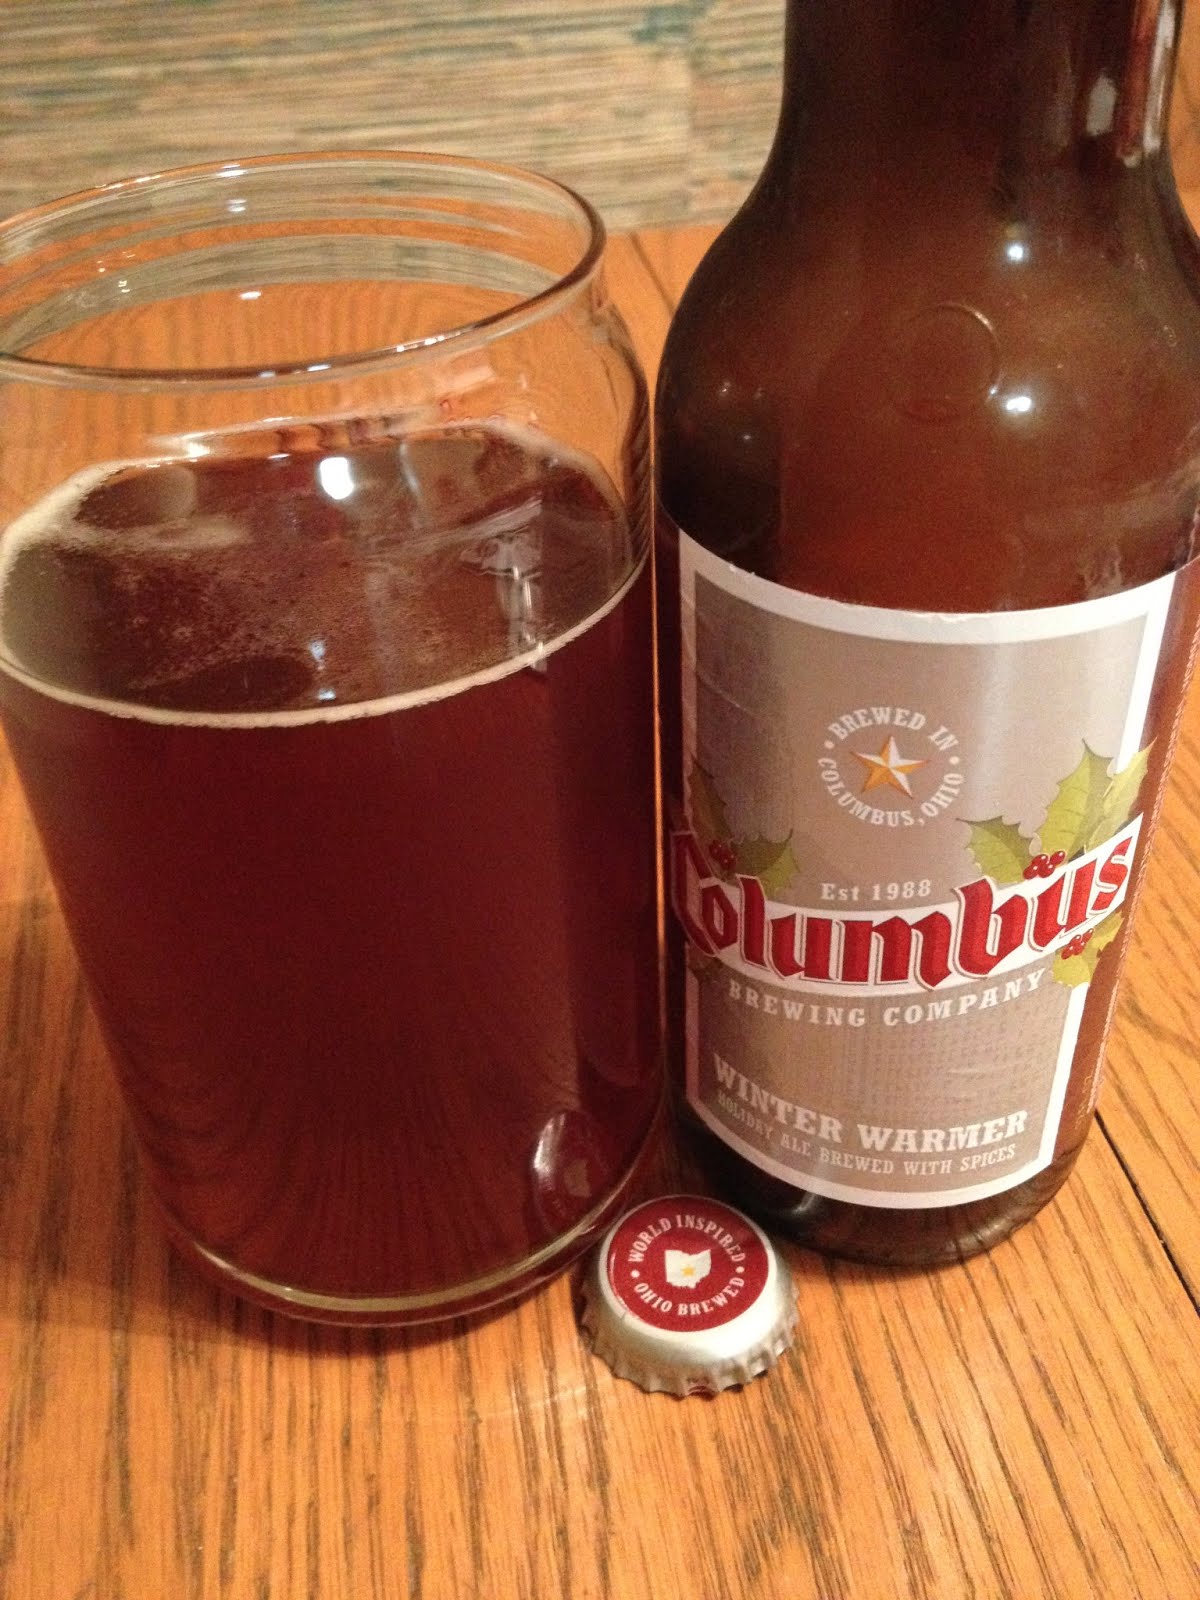 Columbus Brewing Winter Warmer Poured into a Glass - Lee Movic